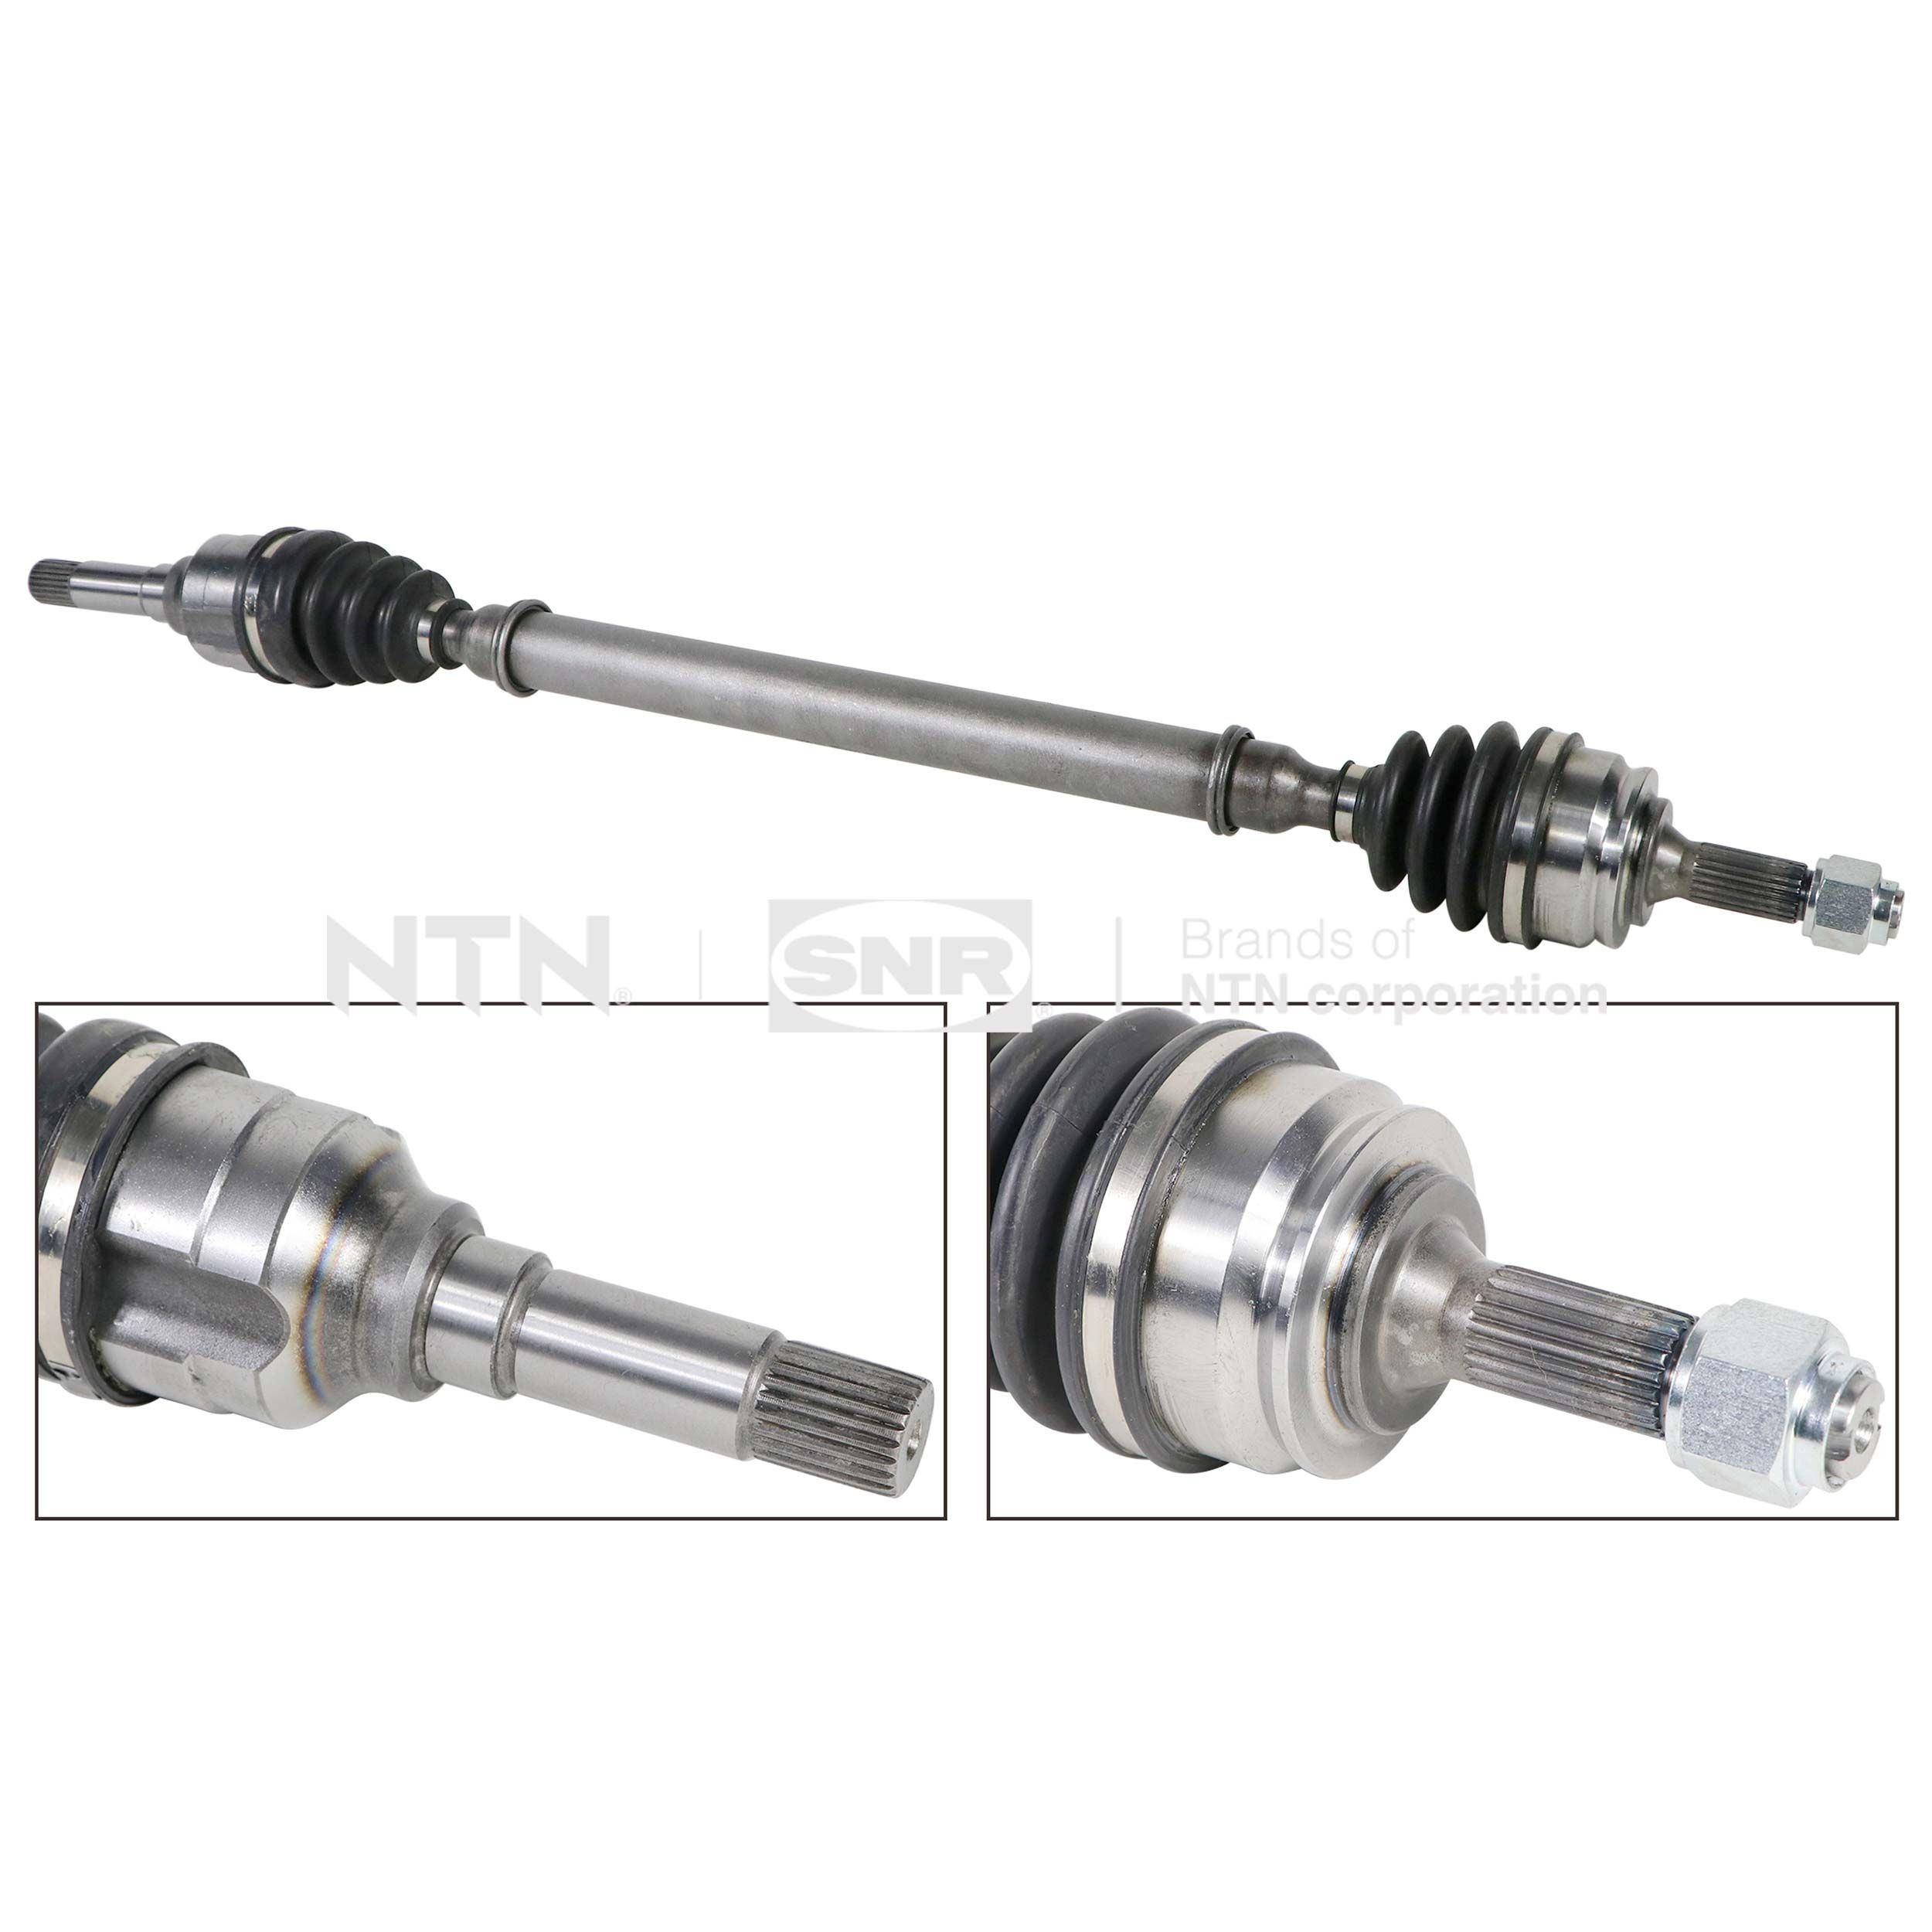 SNR Front Axle Right, 884, 868mm Length: 884, 868mm, External Toothing wheel side: 21 Driveshaft DK66.002 buy